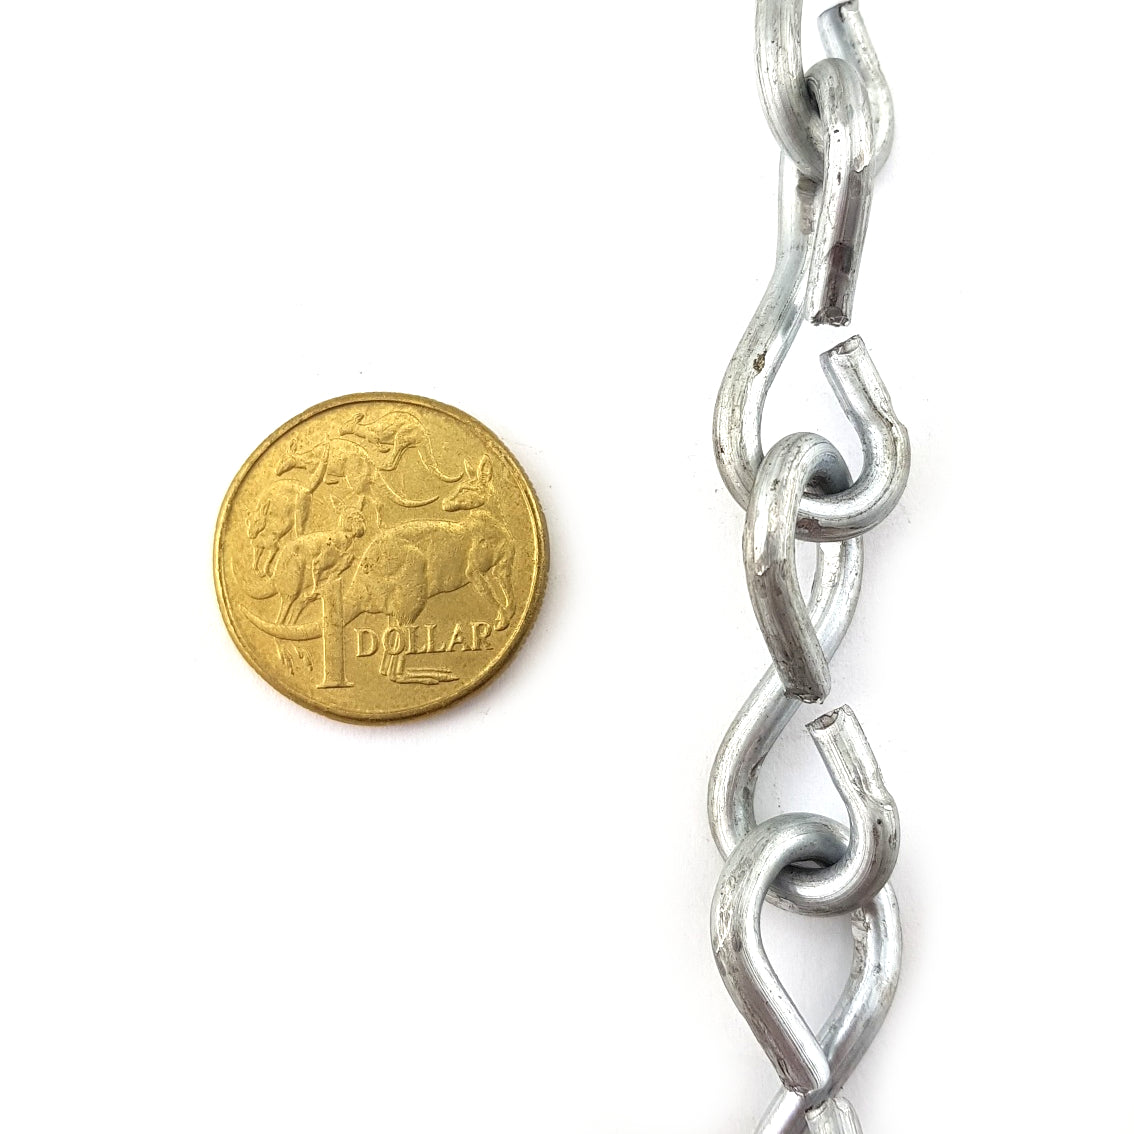 Australian made Single Jack Chain in galvanised finish, size 3.15mm. Chain by the metre. Melbourne, Australia.